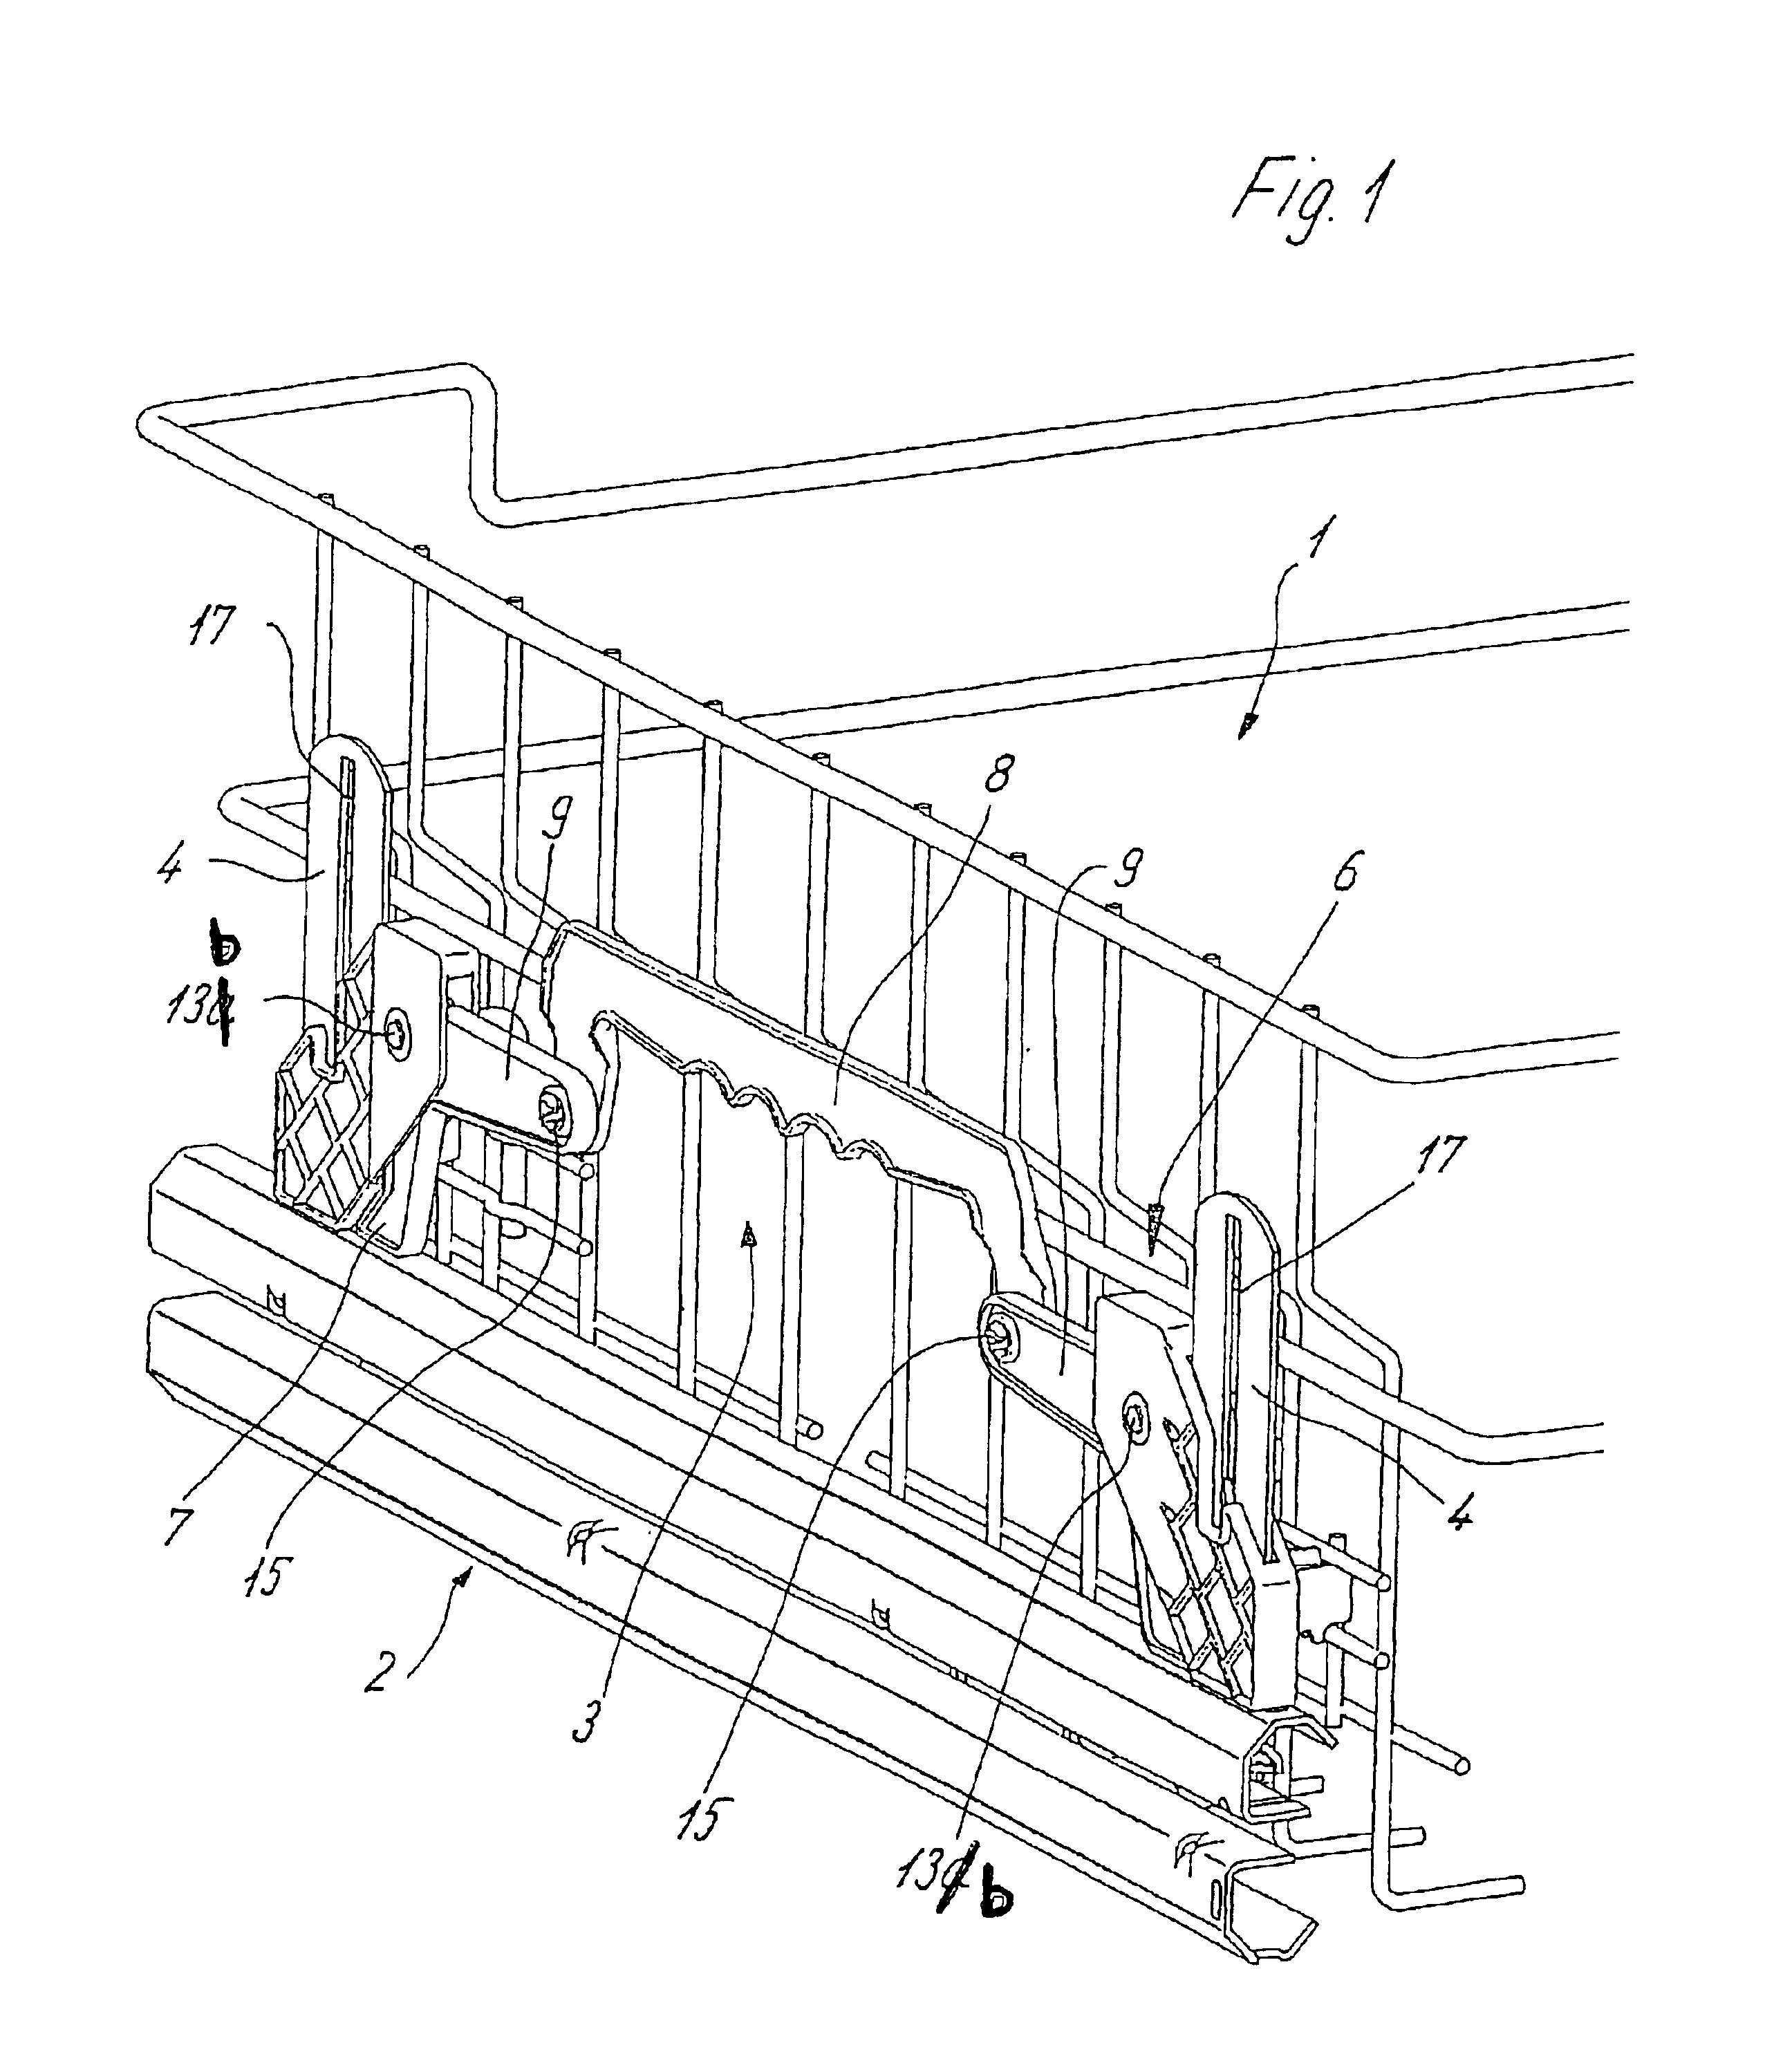 Container in the form of a compartment for domestic appliance